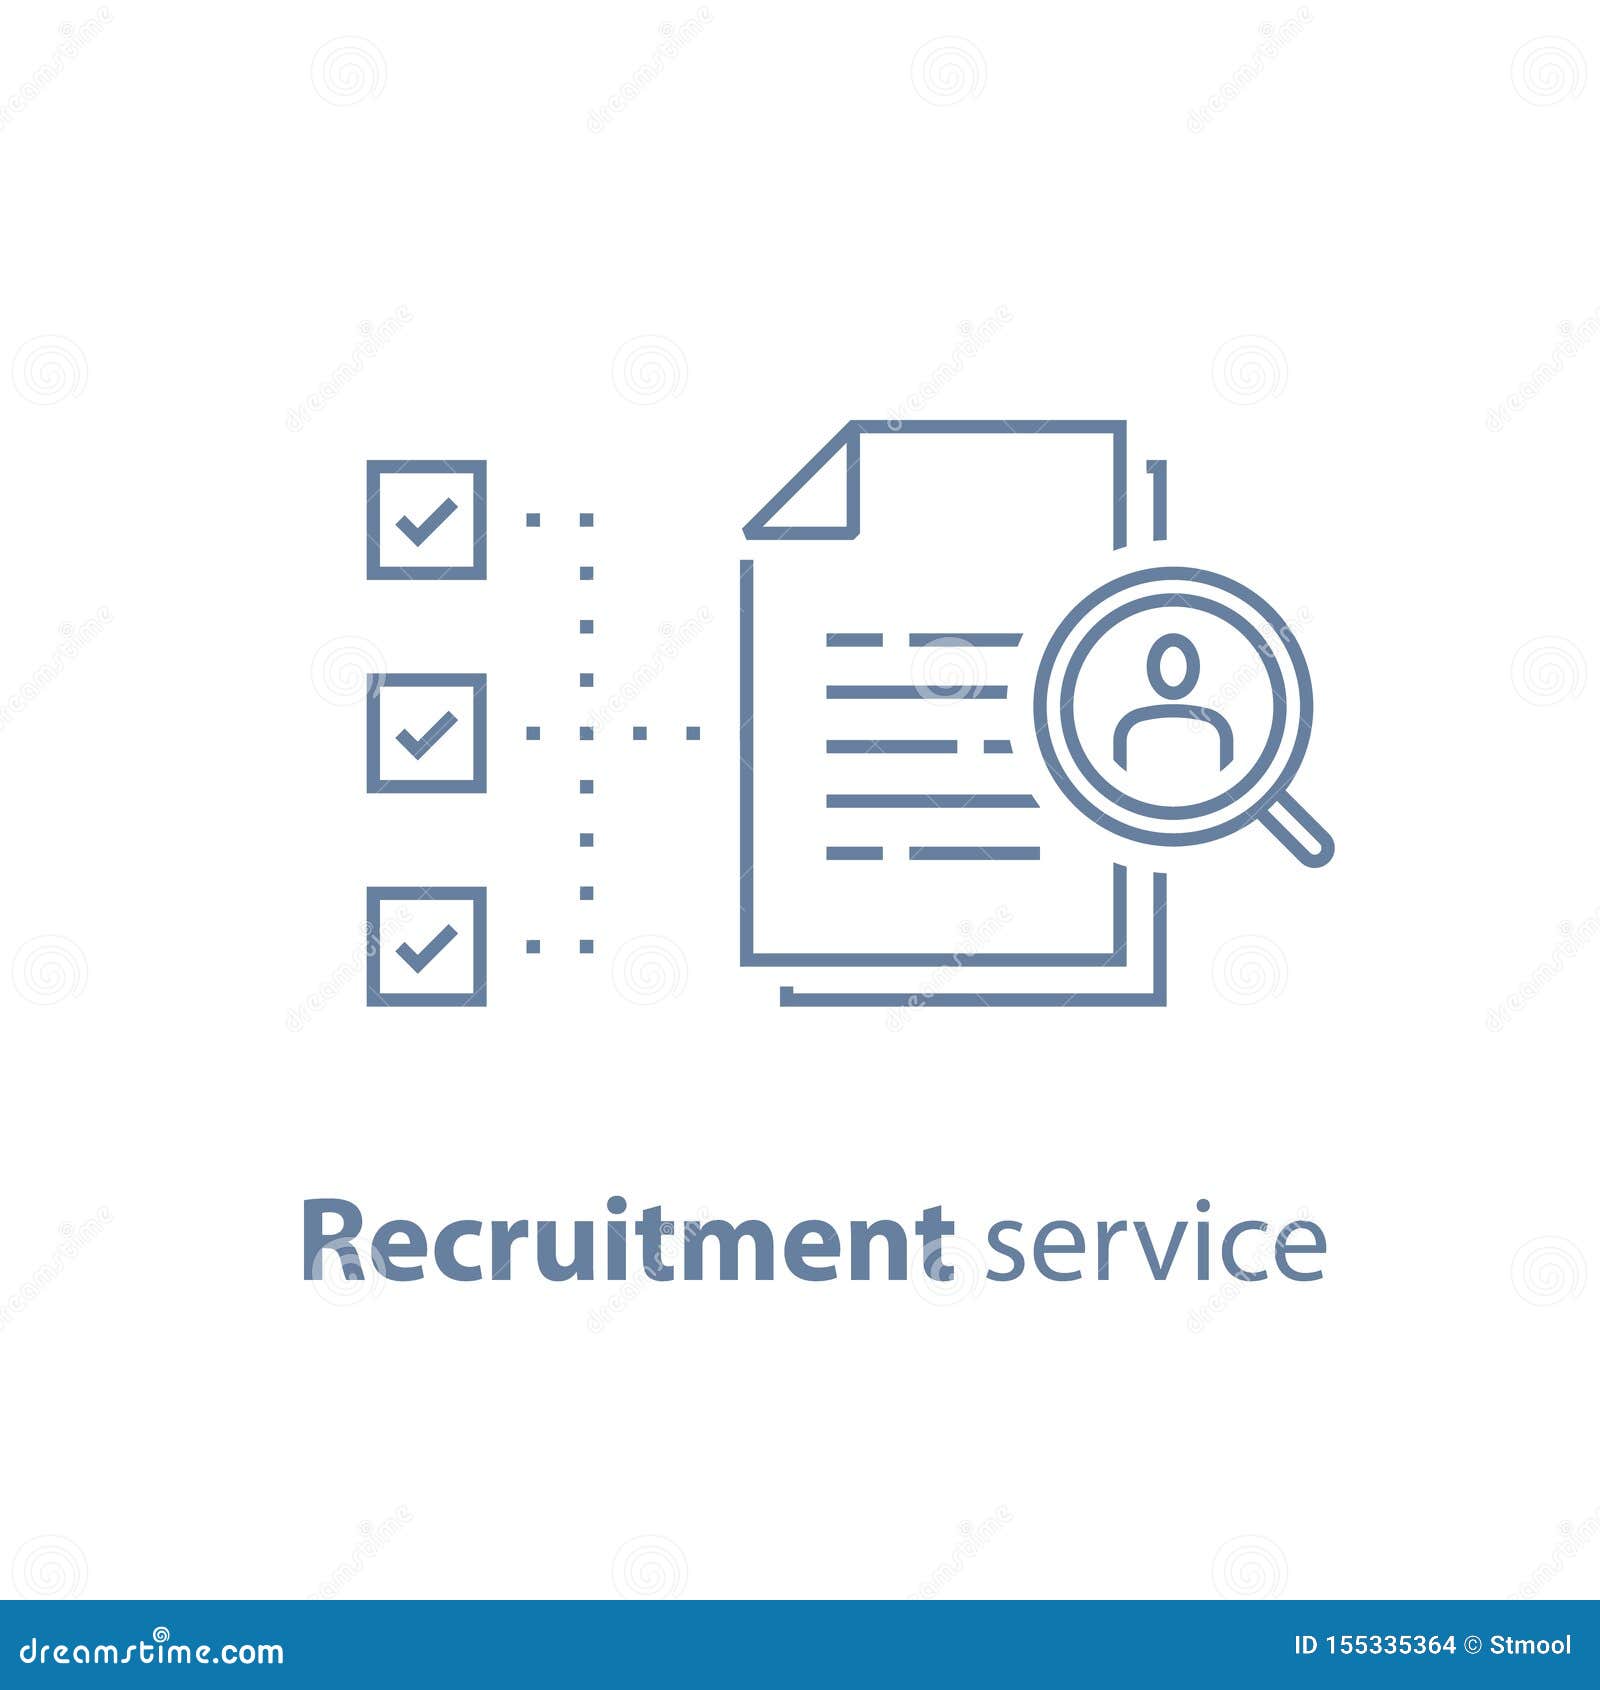 Human resources, choose candidate, recruitment service, fill vacancy, employment concept, application form review, staff search